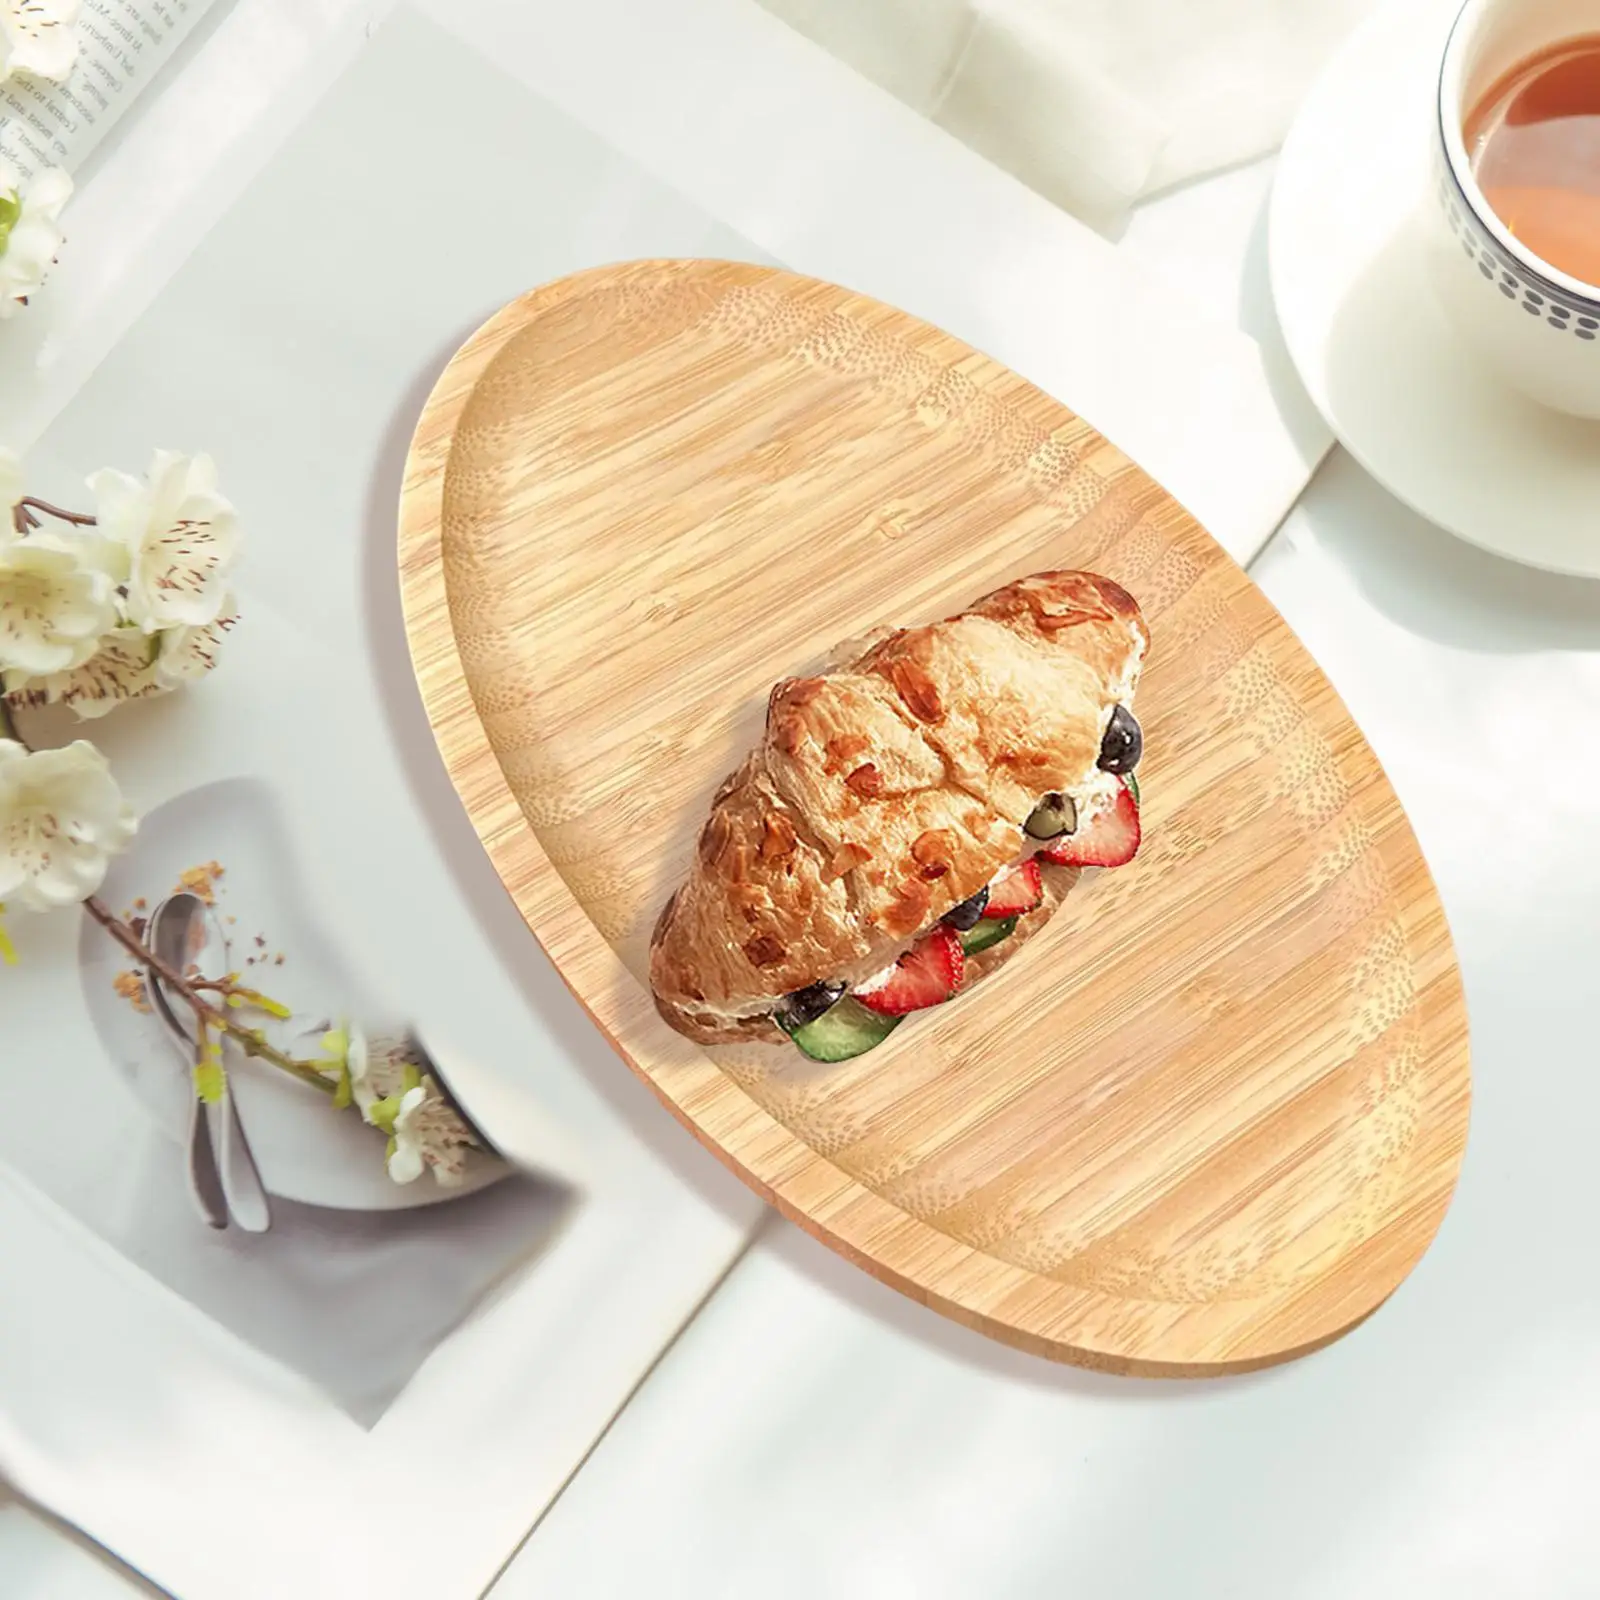 Wood Tray Server Counter Organizer Photo Props Wooden Serving Tray for Home Kitchen Decor Afternoon Tea Breakfast Dinner Party